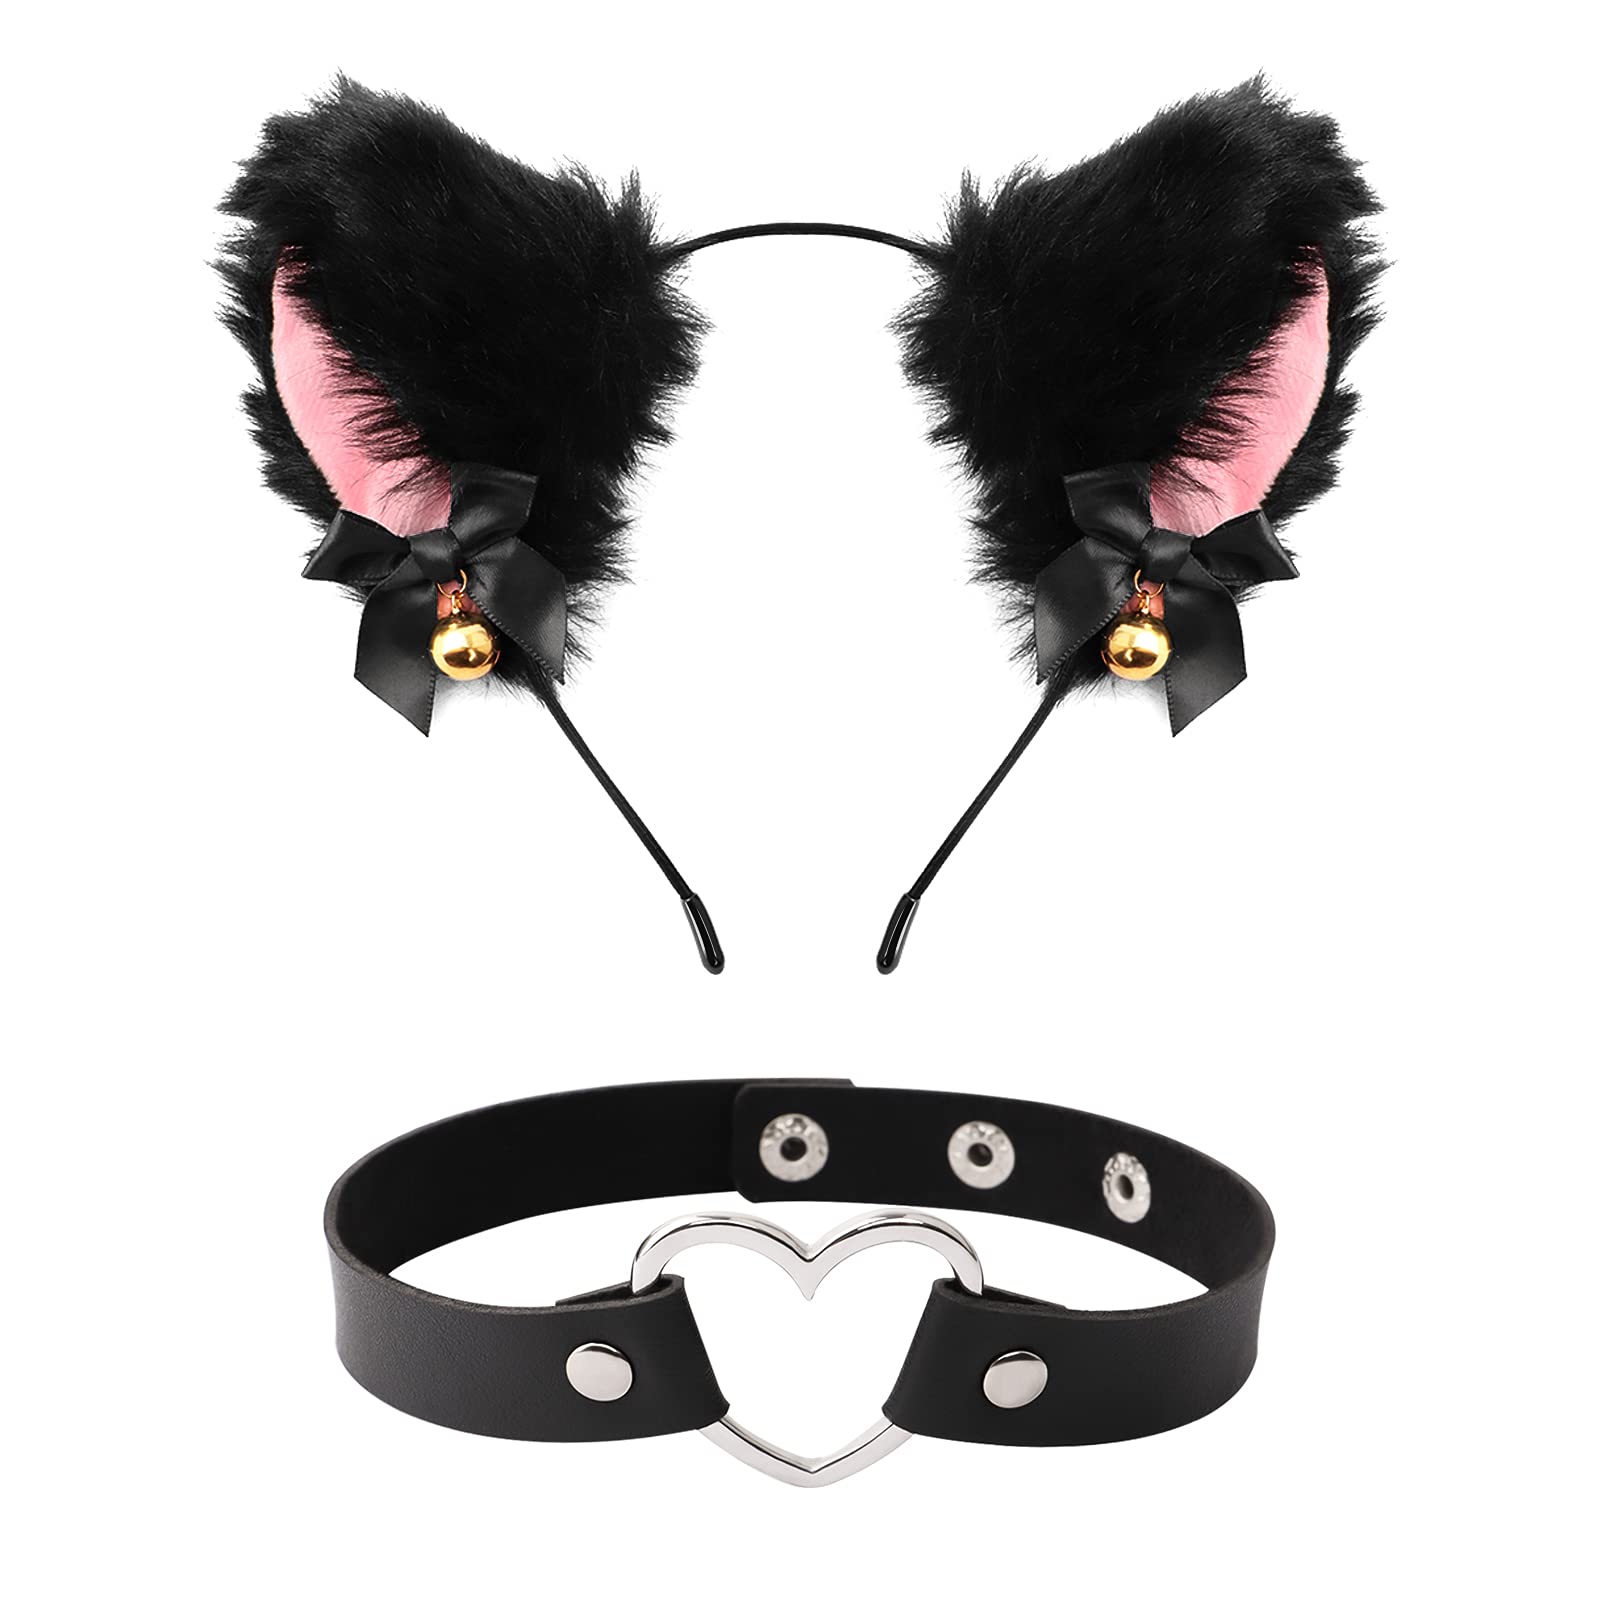 Cat Ears Headband, Cat Ears Hair Hoop and Punk Fashion Choker, Cute Cat Ears Hair Band with Bell for Women Girls Cat Cosplay Fancy Dress Party